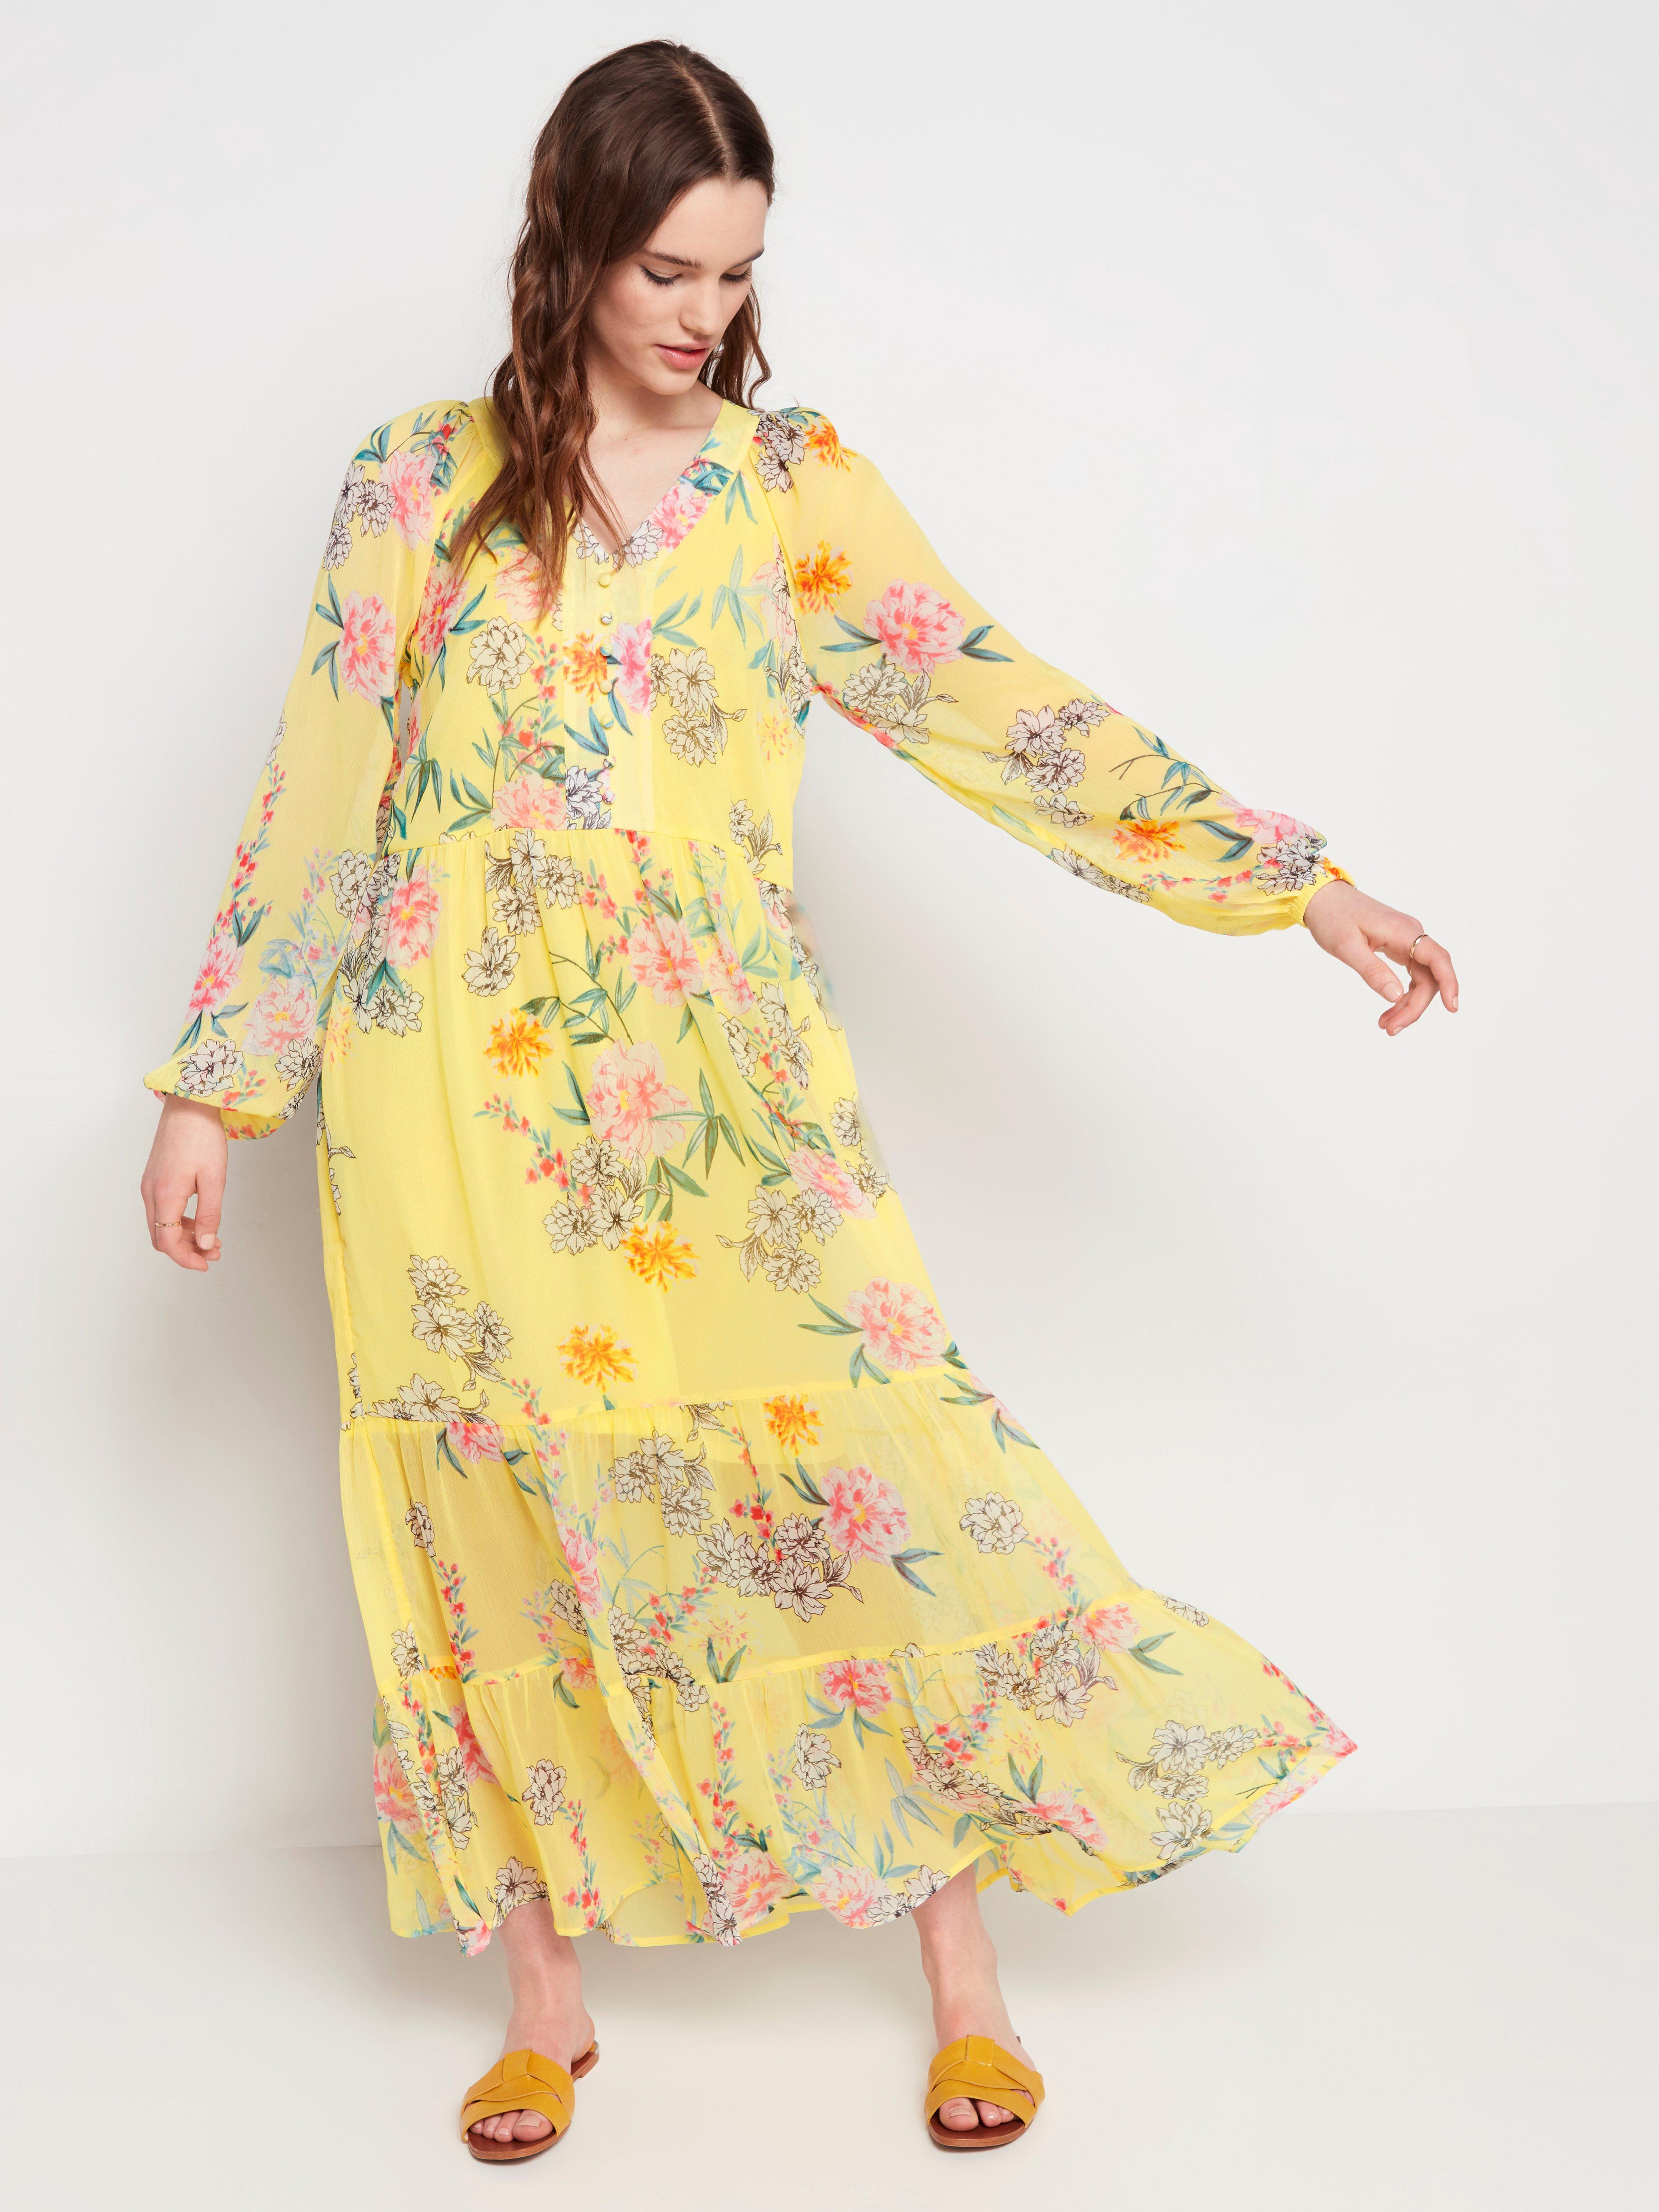 Yellow chiffon maxi dress with floral ...